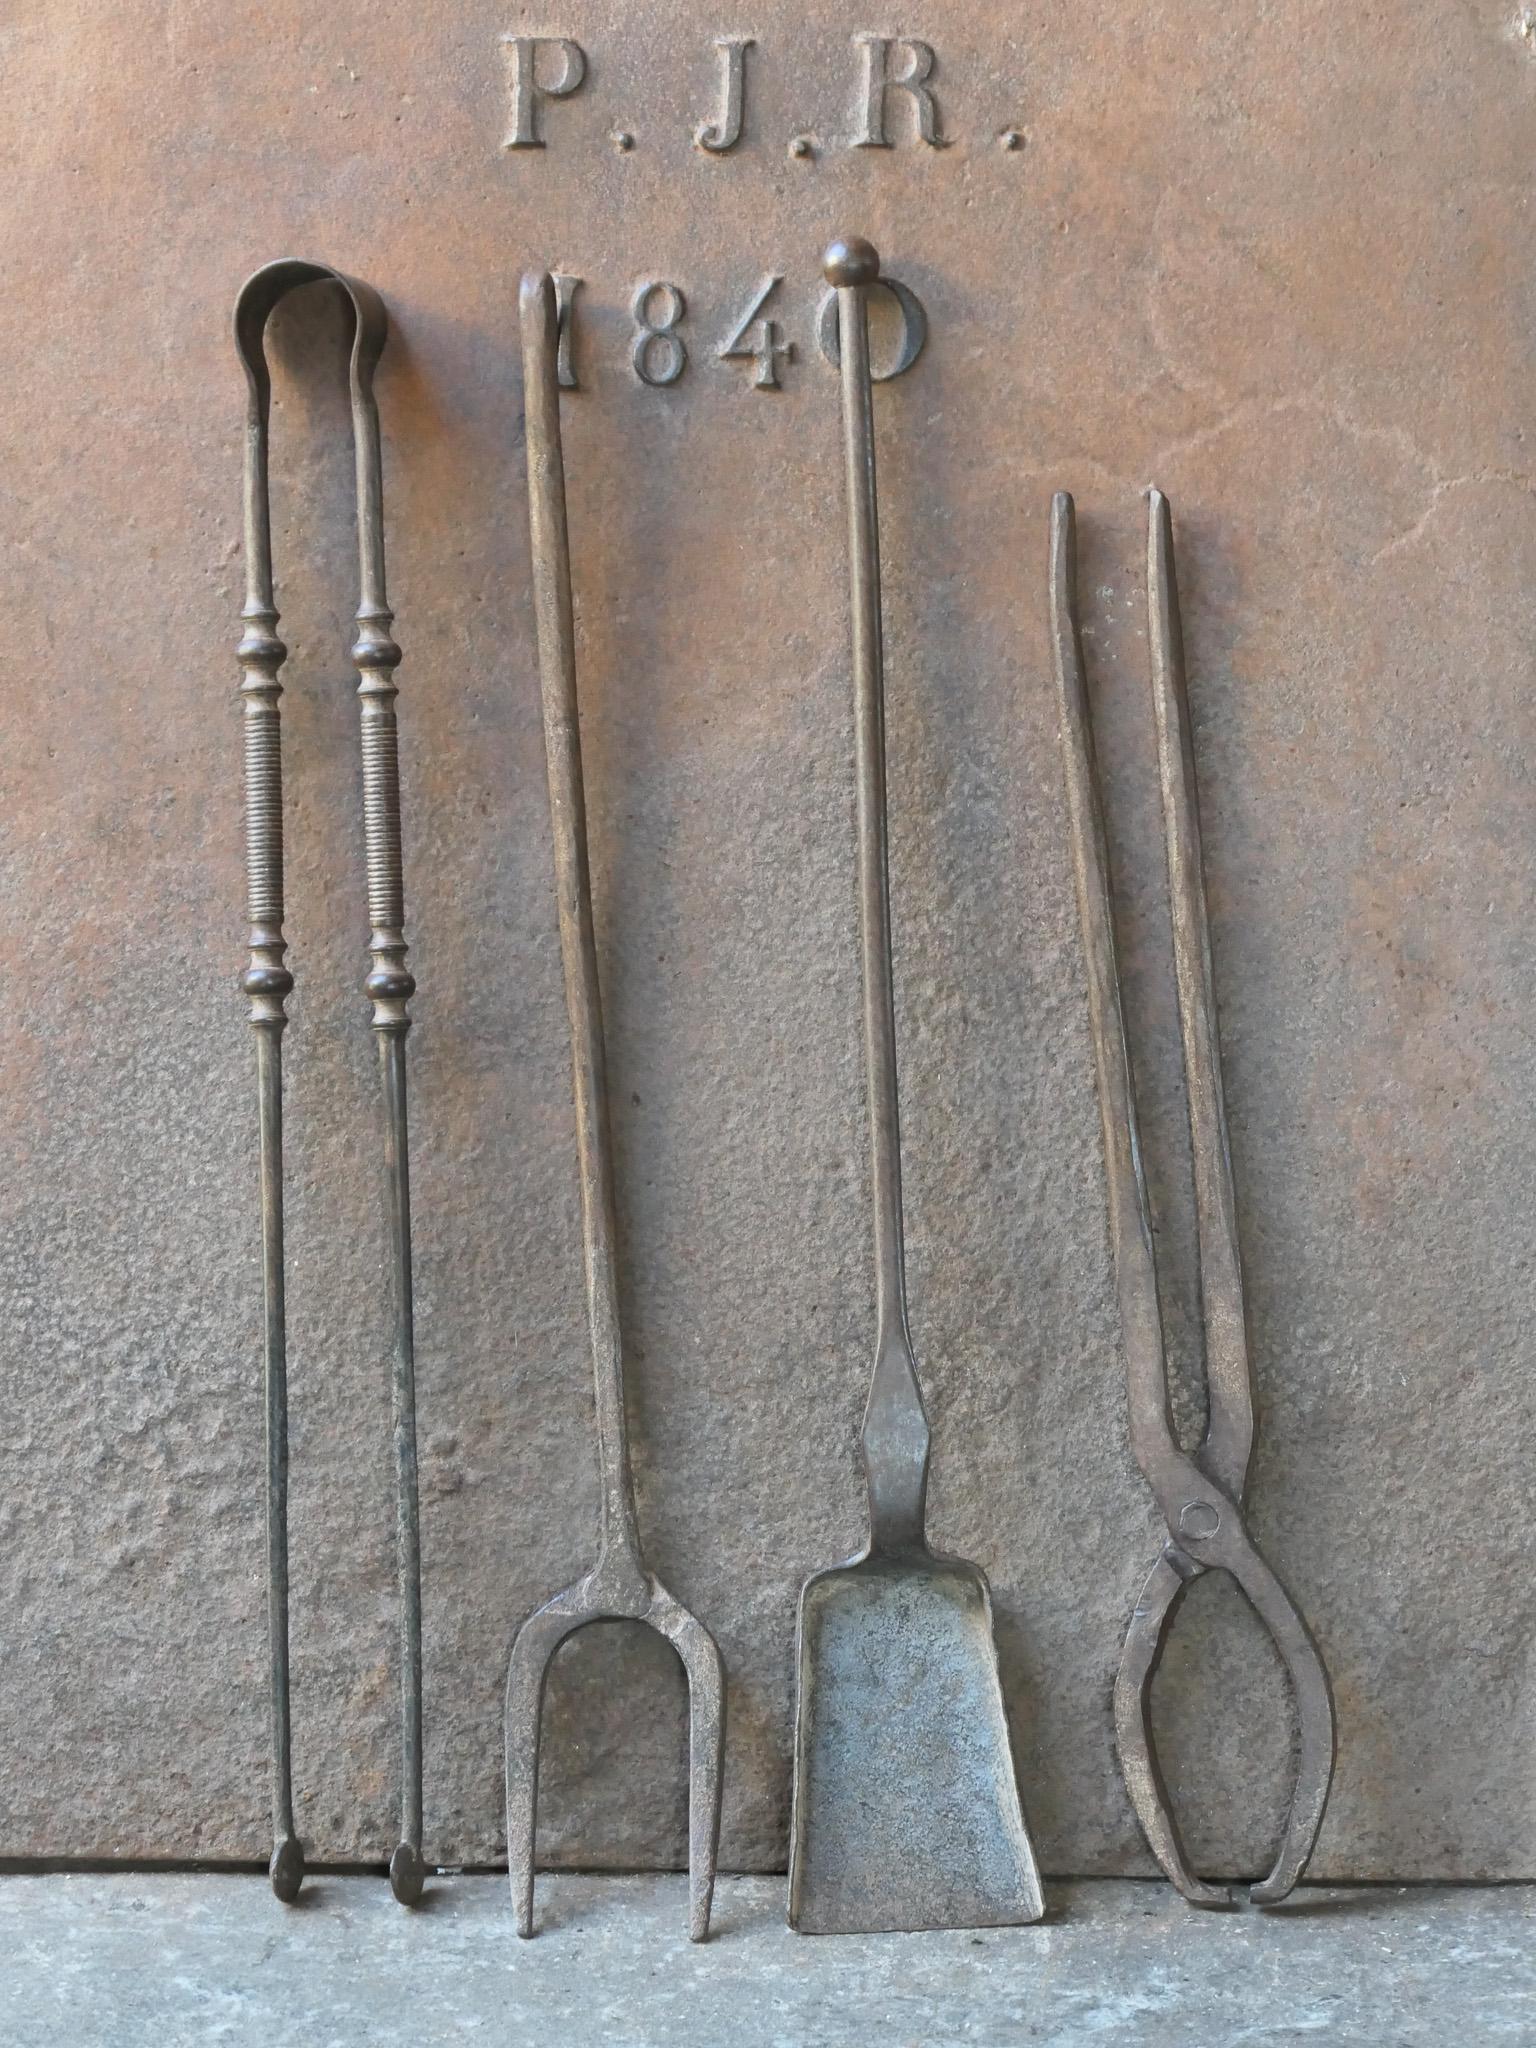 Rustic 18th-19th century French fireplace tool set. The tool set consists of fireplace tongs, shovel, a fire fork and log tongs. The tools are made of wrought iron. The set is in a good condition and fit for use in the fireplace.